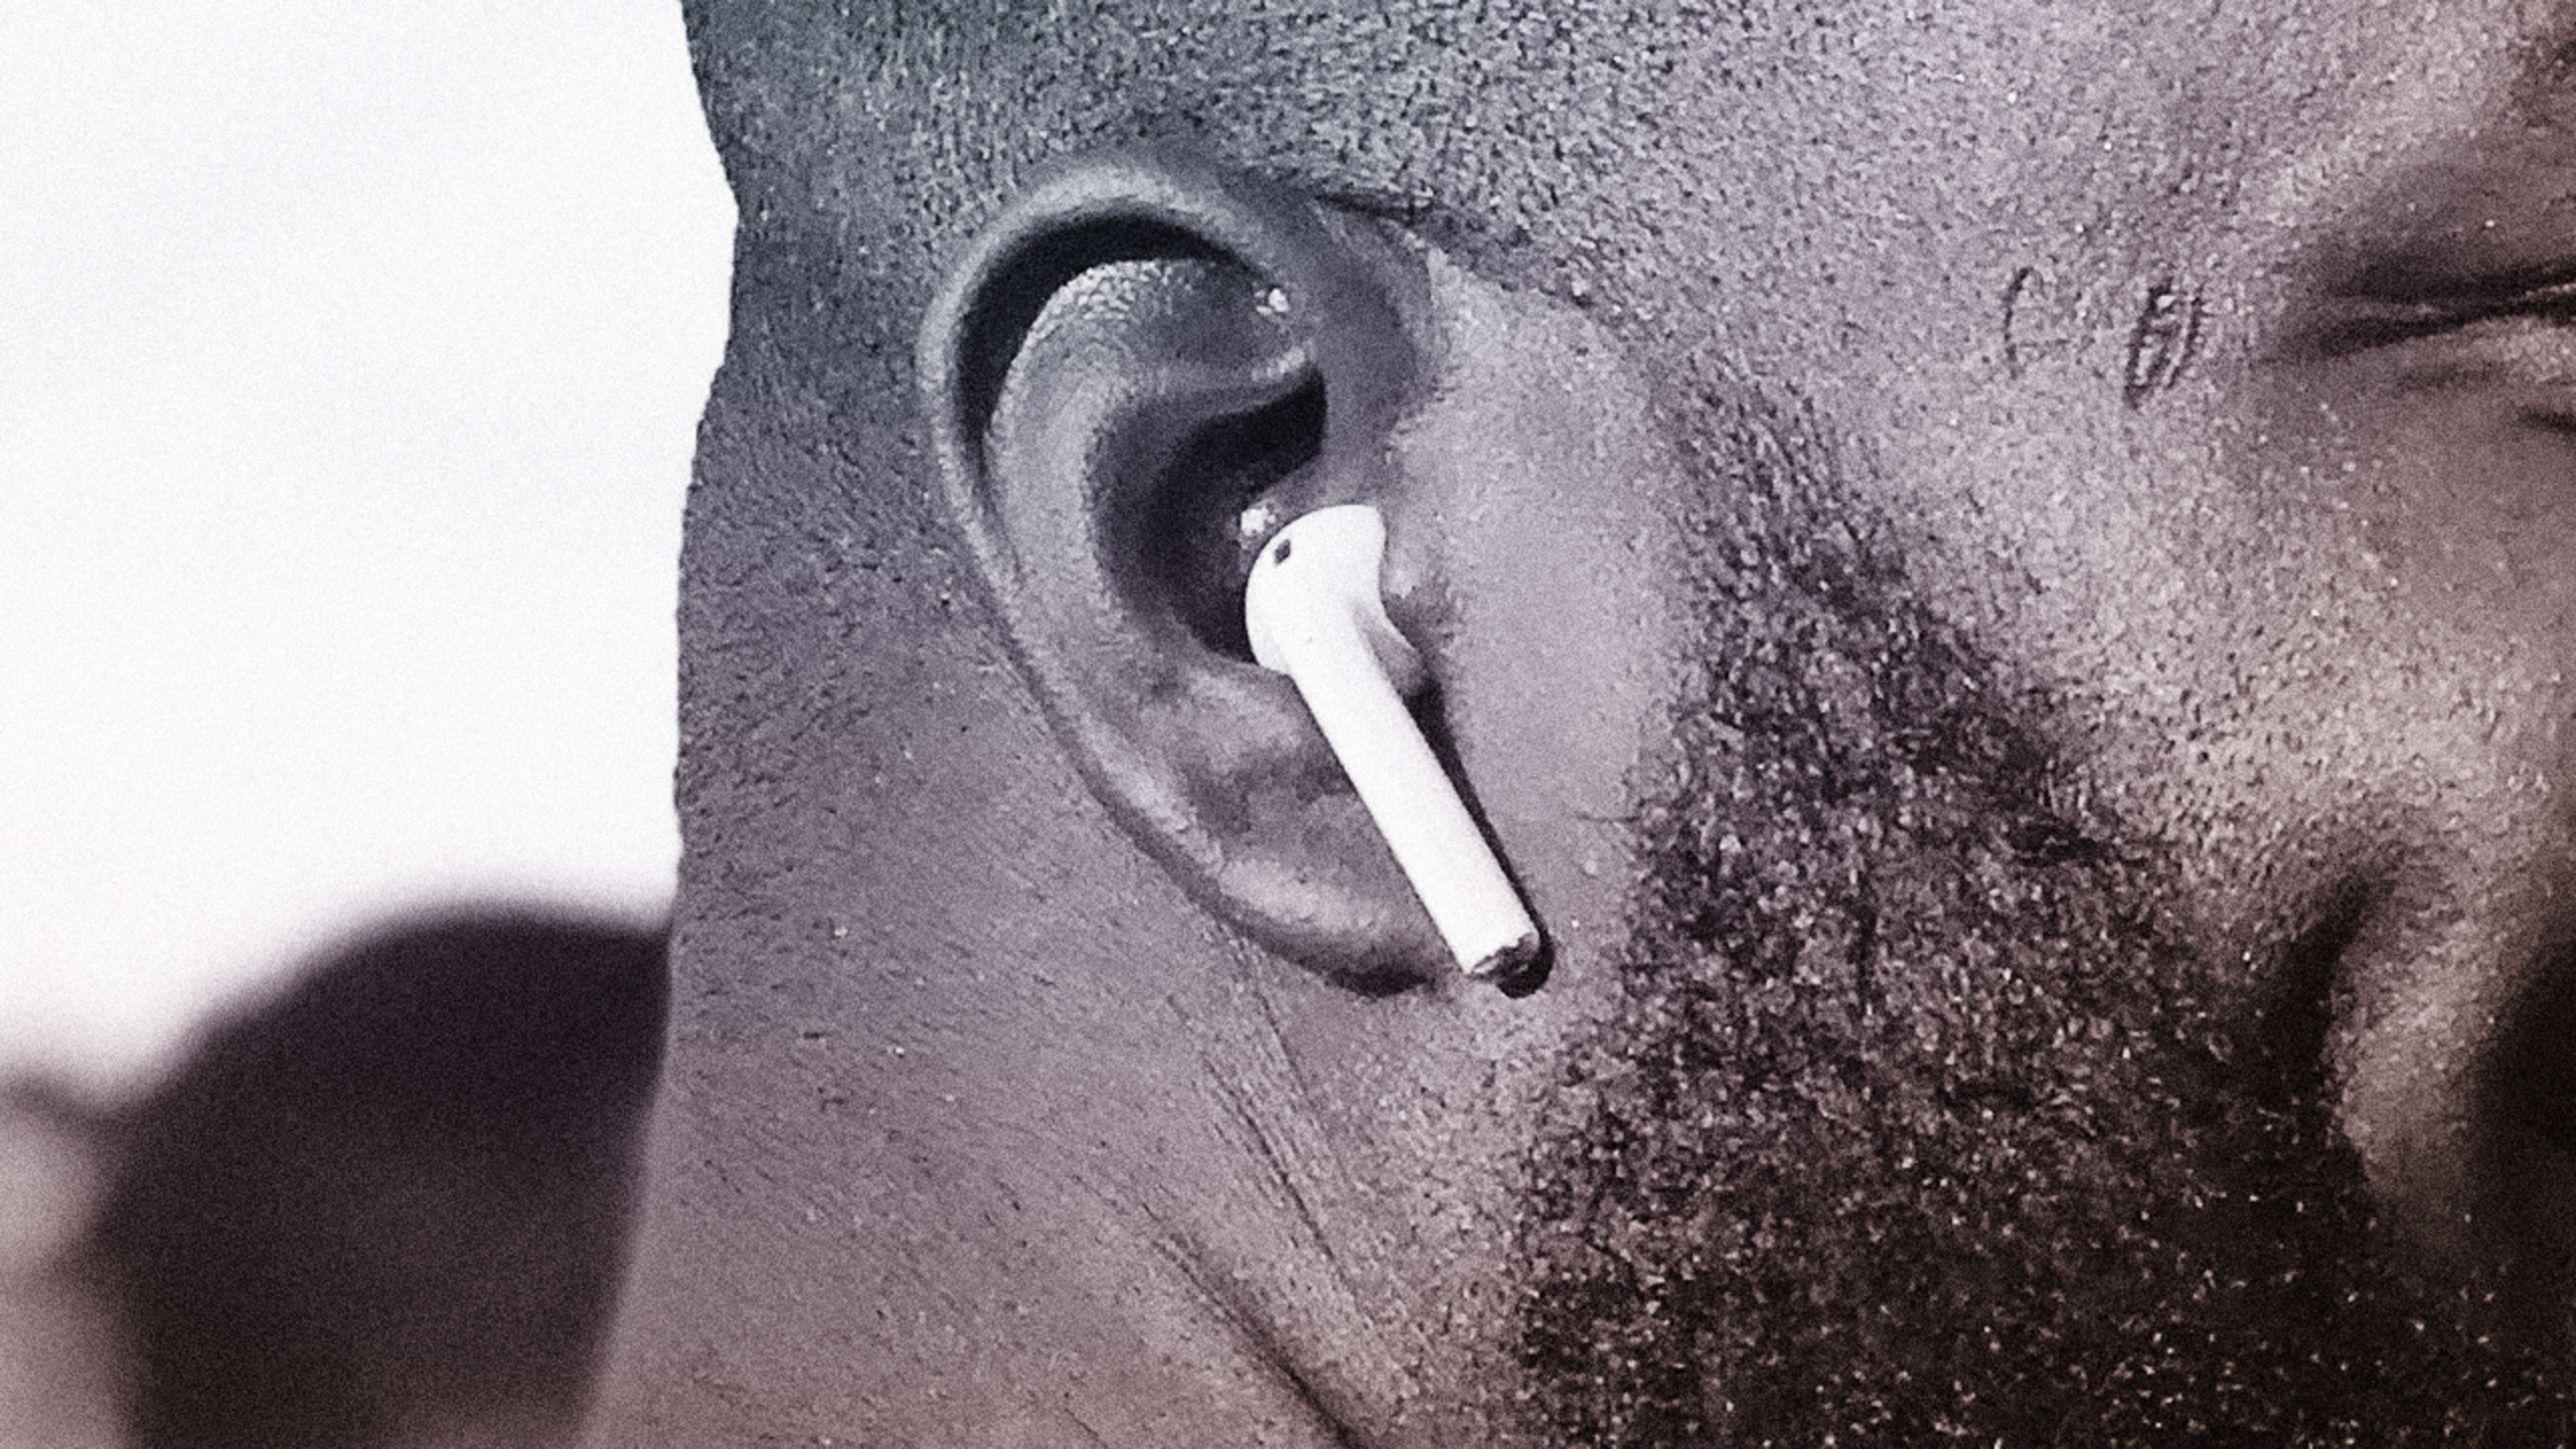 Microsoft might make “Surface Buds” as an AirPods alternative